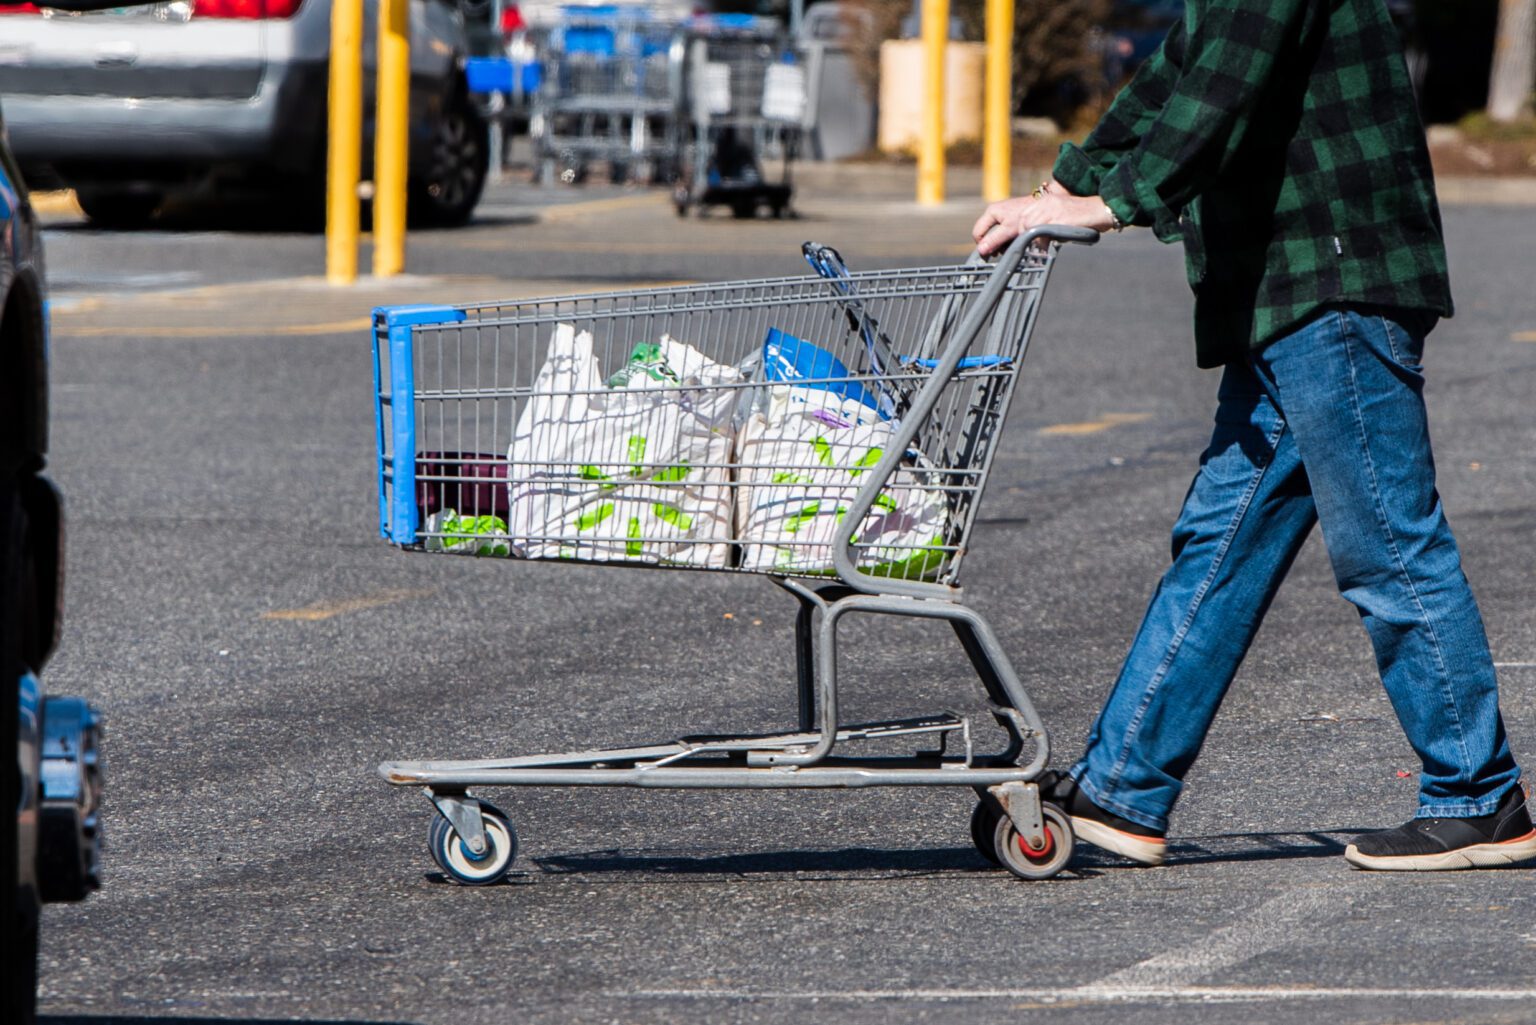 A shopper exits the Walmart store in Bellingham on March 29. Walmart will no longer provide plastic or paper bags at checkout in Washington state starting April 18